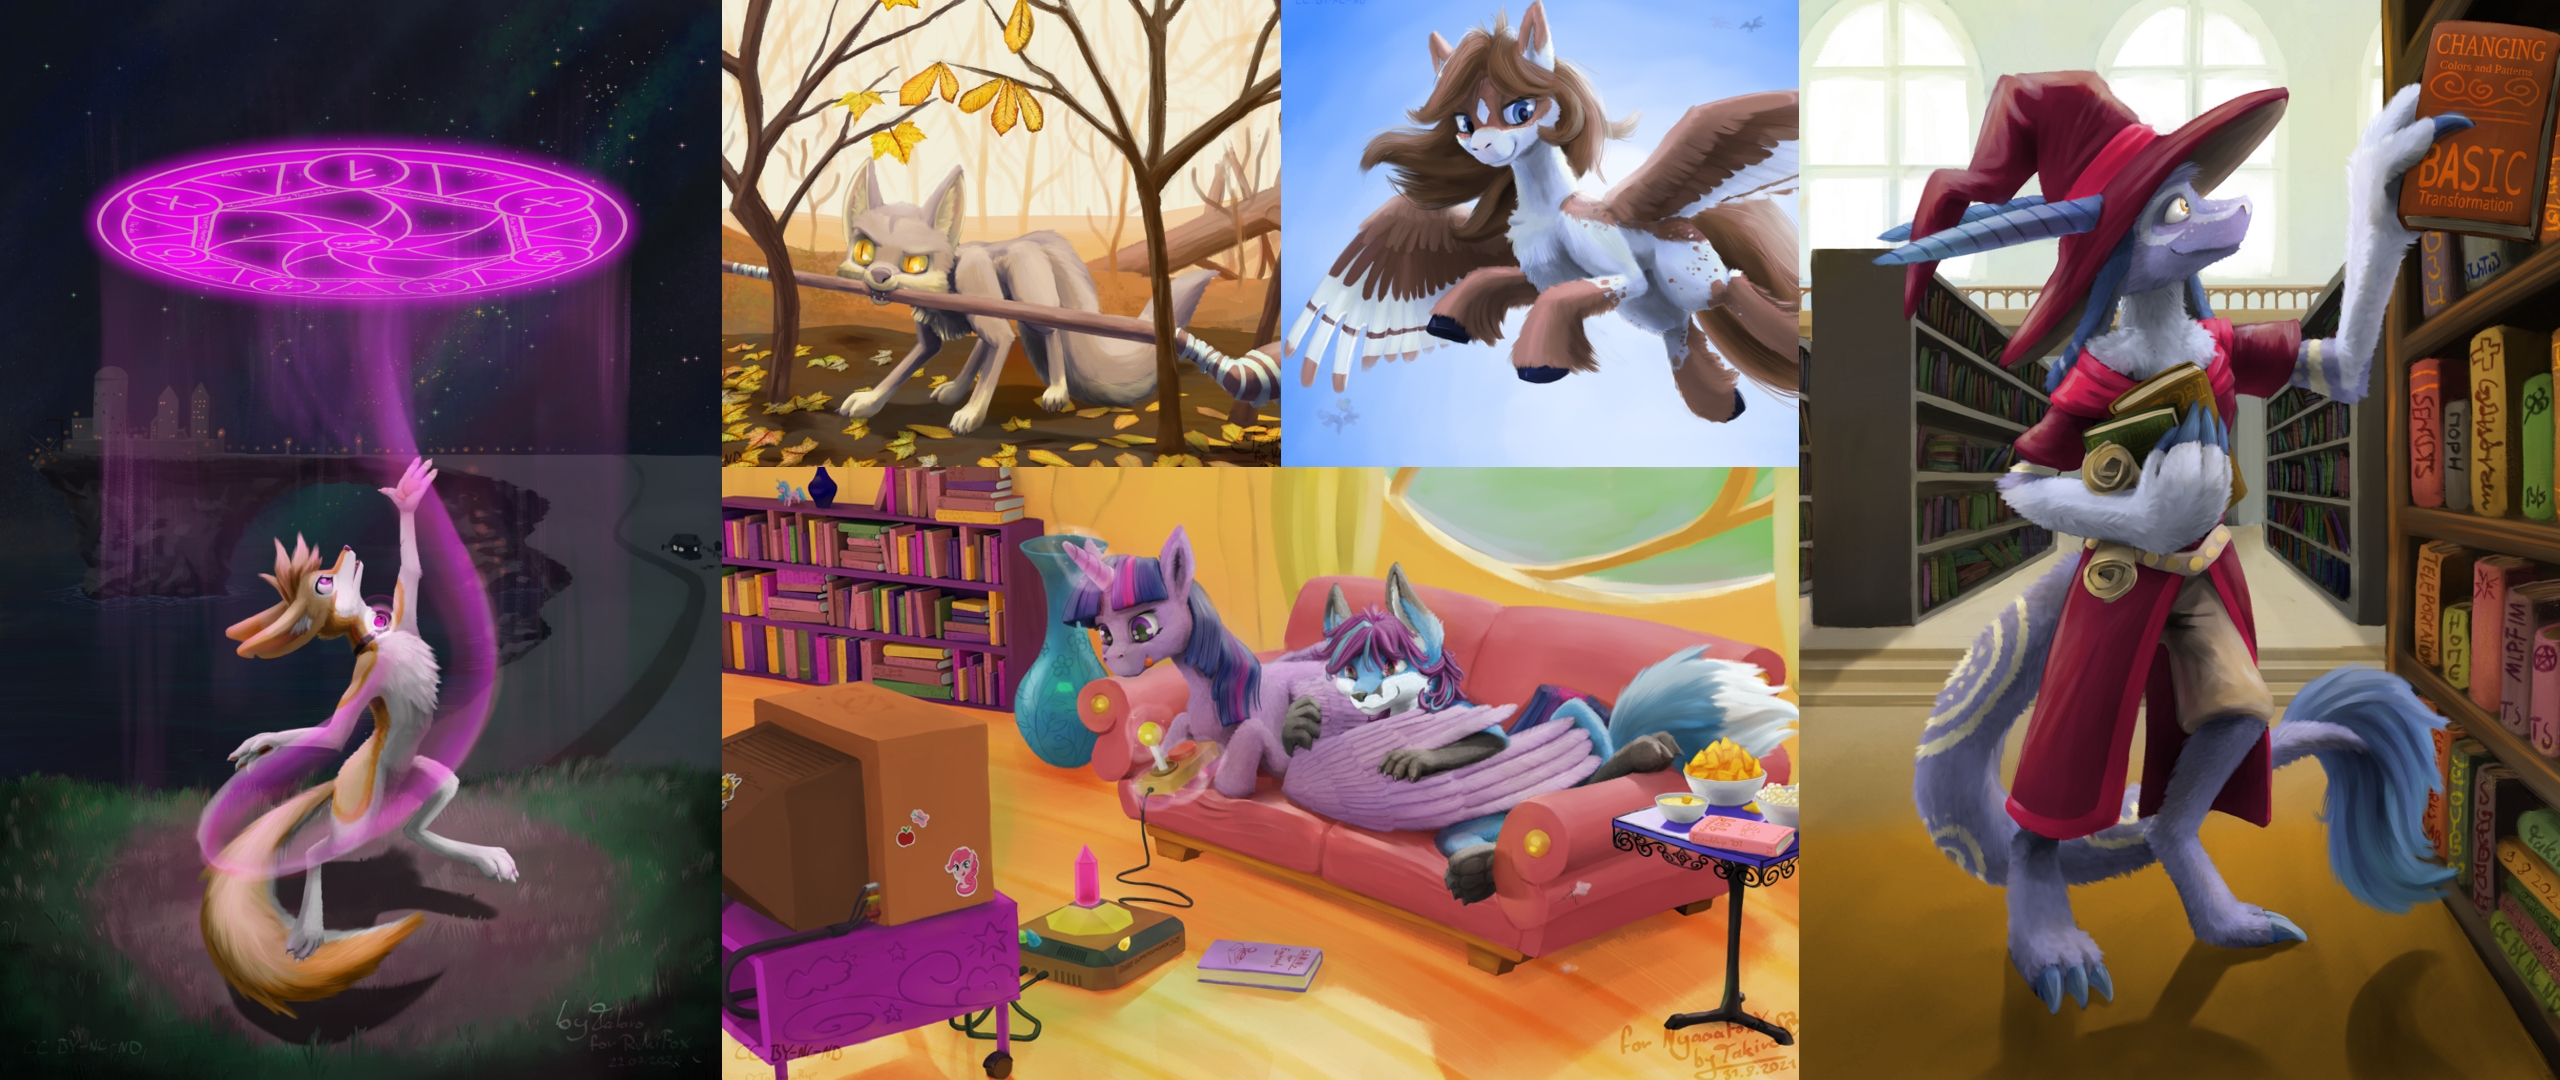 Banner image showing various artworks. A fox casting a spell. A pony playing video games. A fox stuck between thwo small trees with the staff in his moutn. A Pegasus flying through the blou sky and a goat like wizard creature taking books from a shelf in a library.